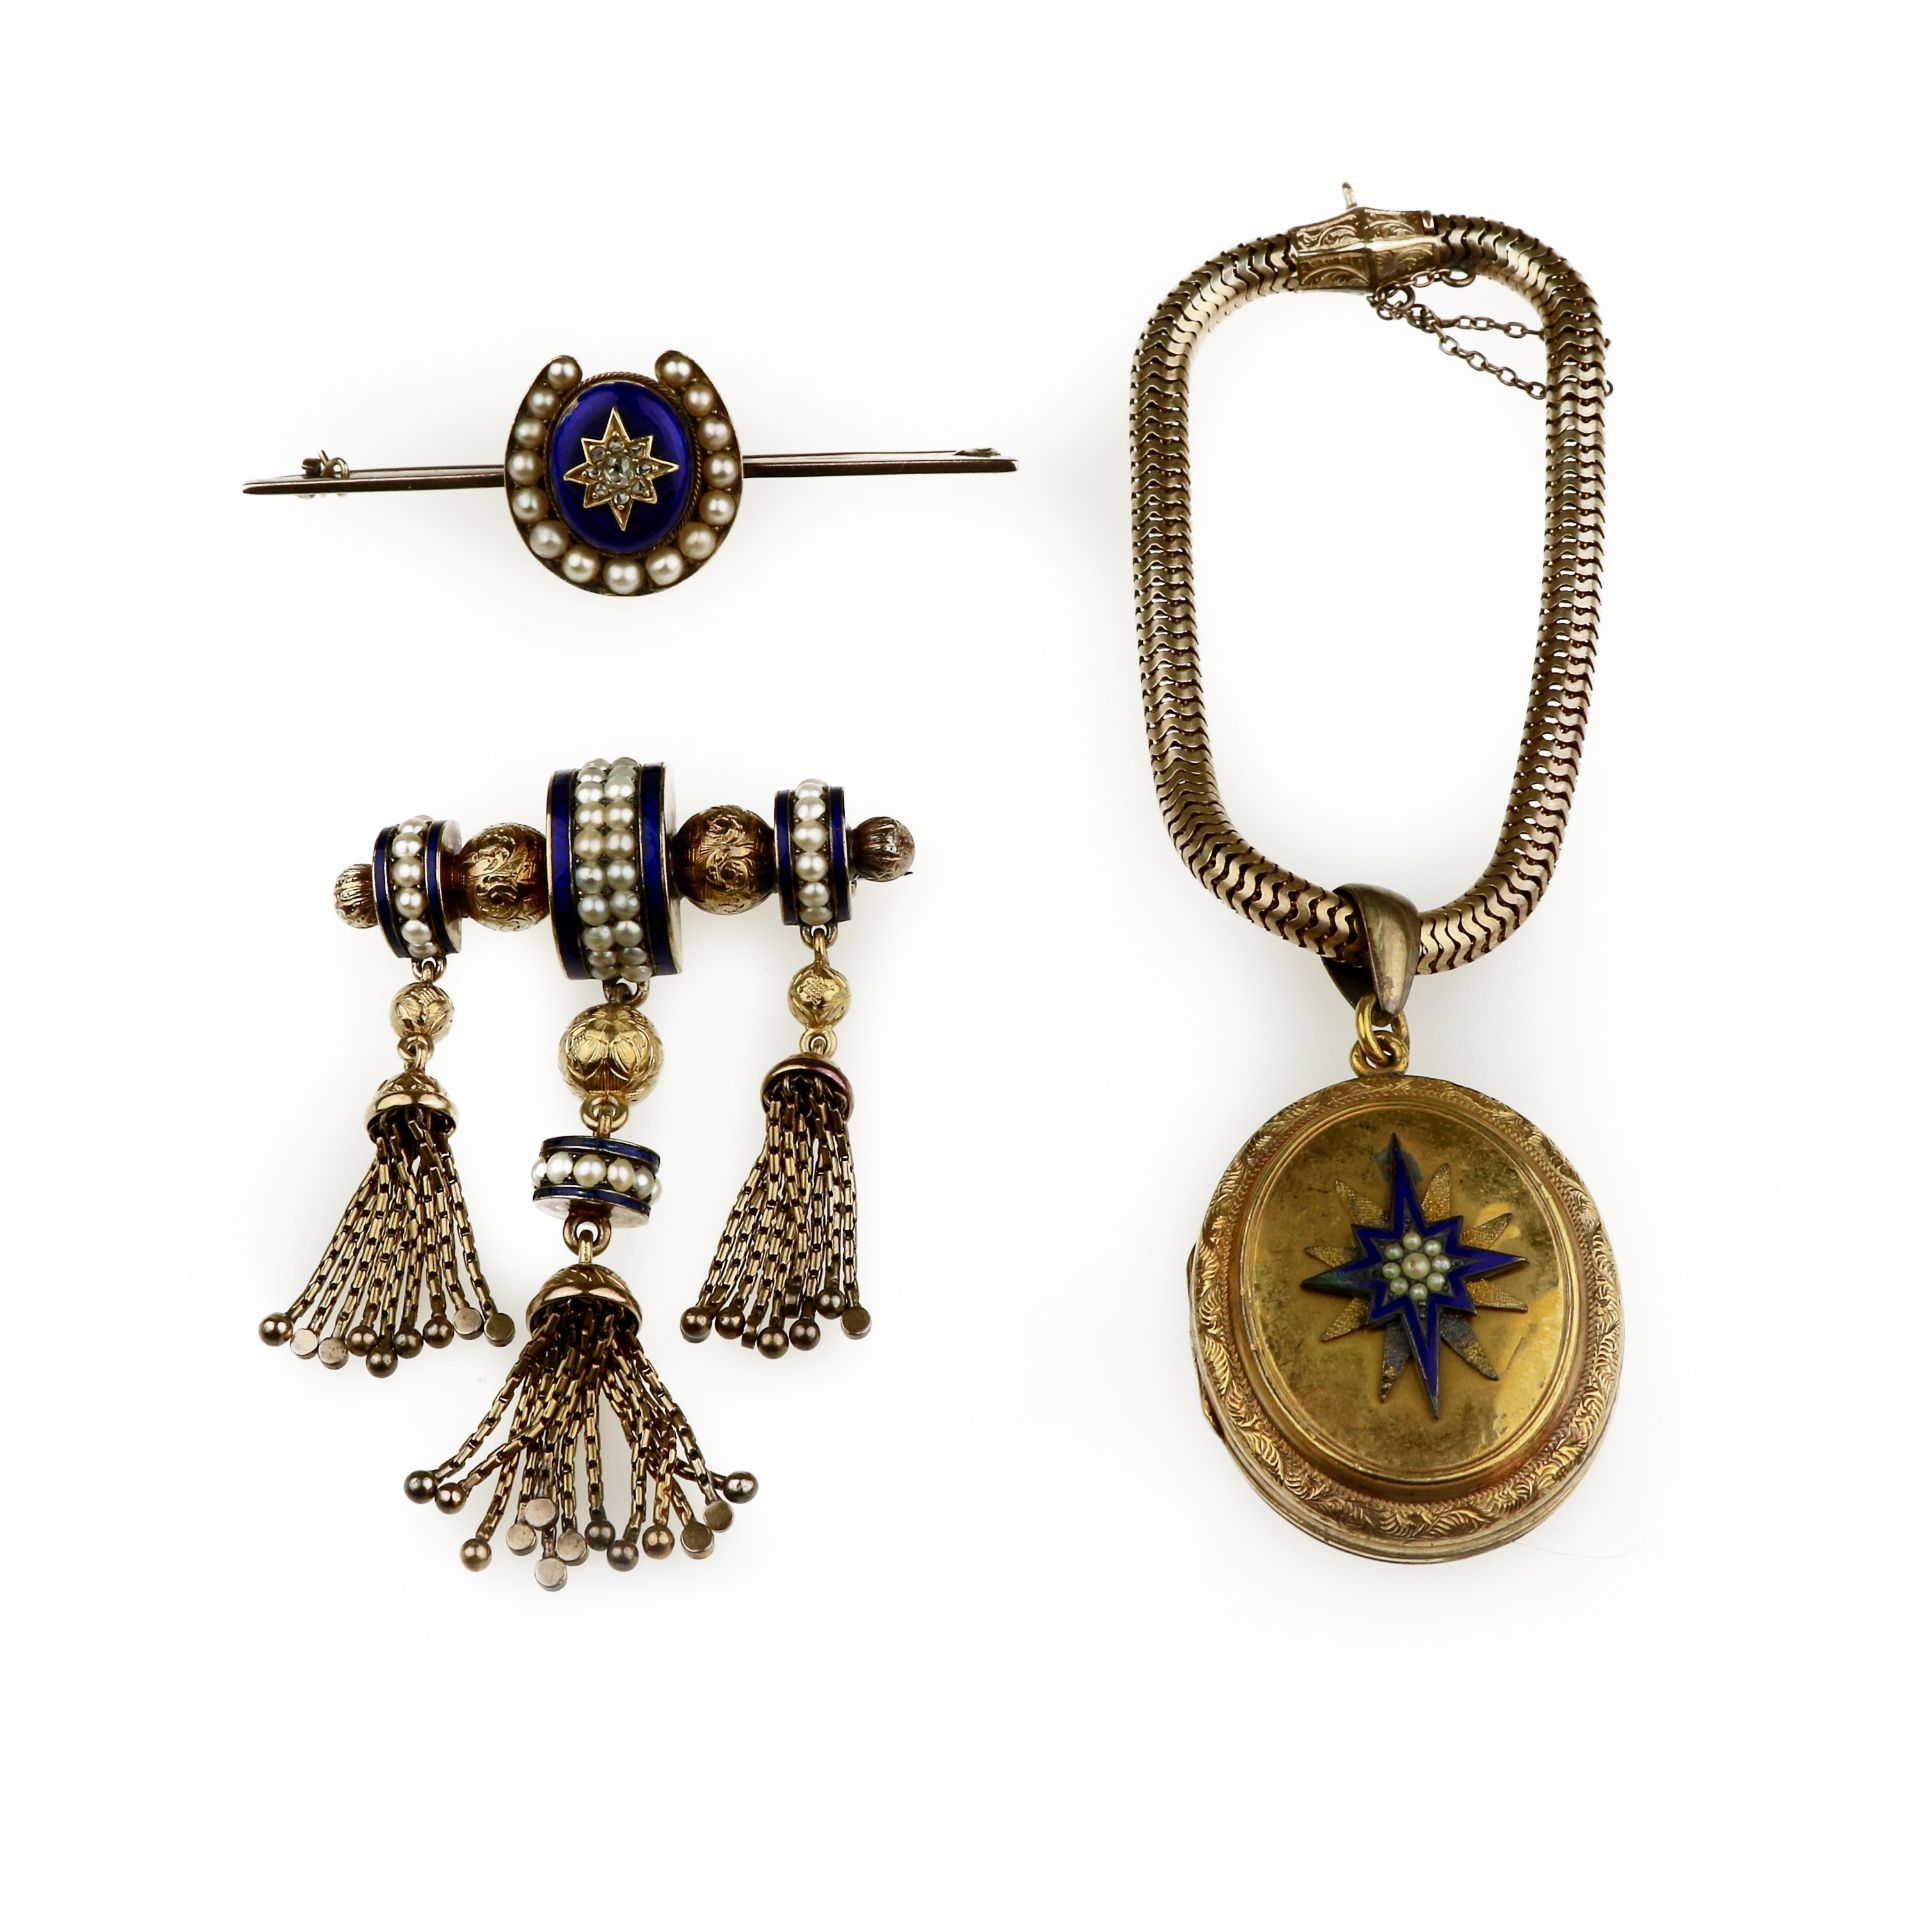 Two brooches and a bracelet with locket, mid-19th century